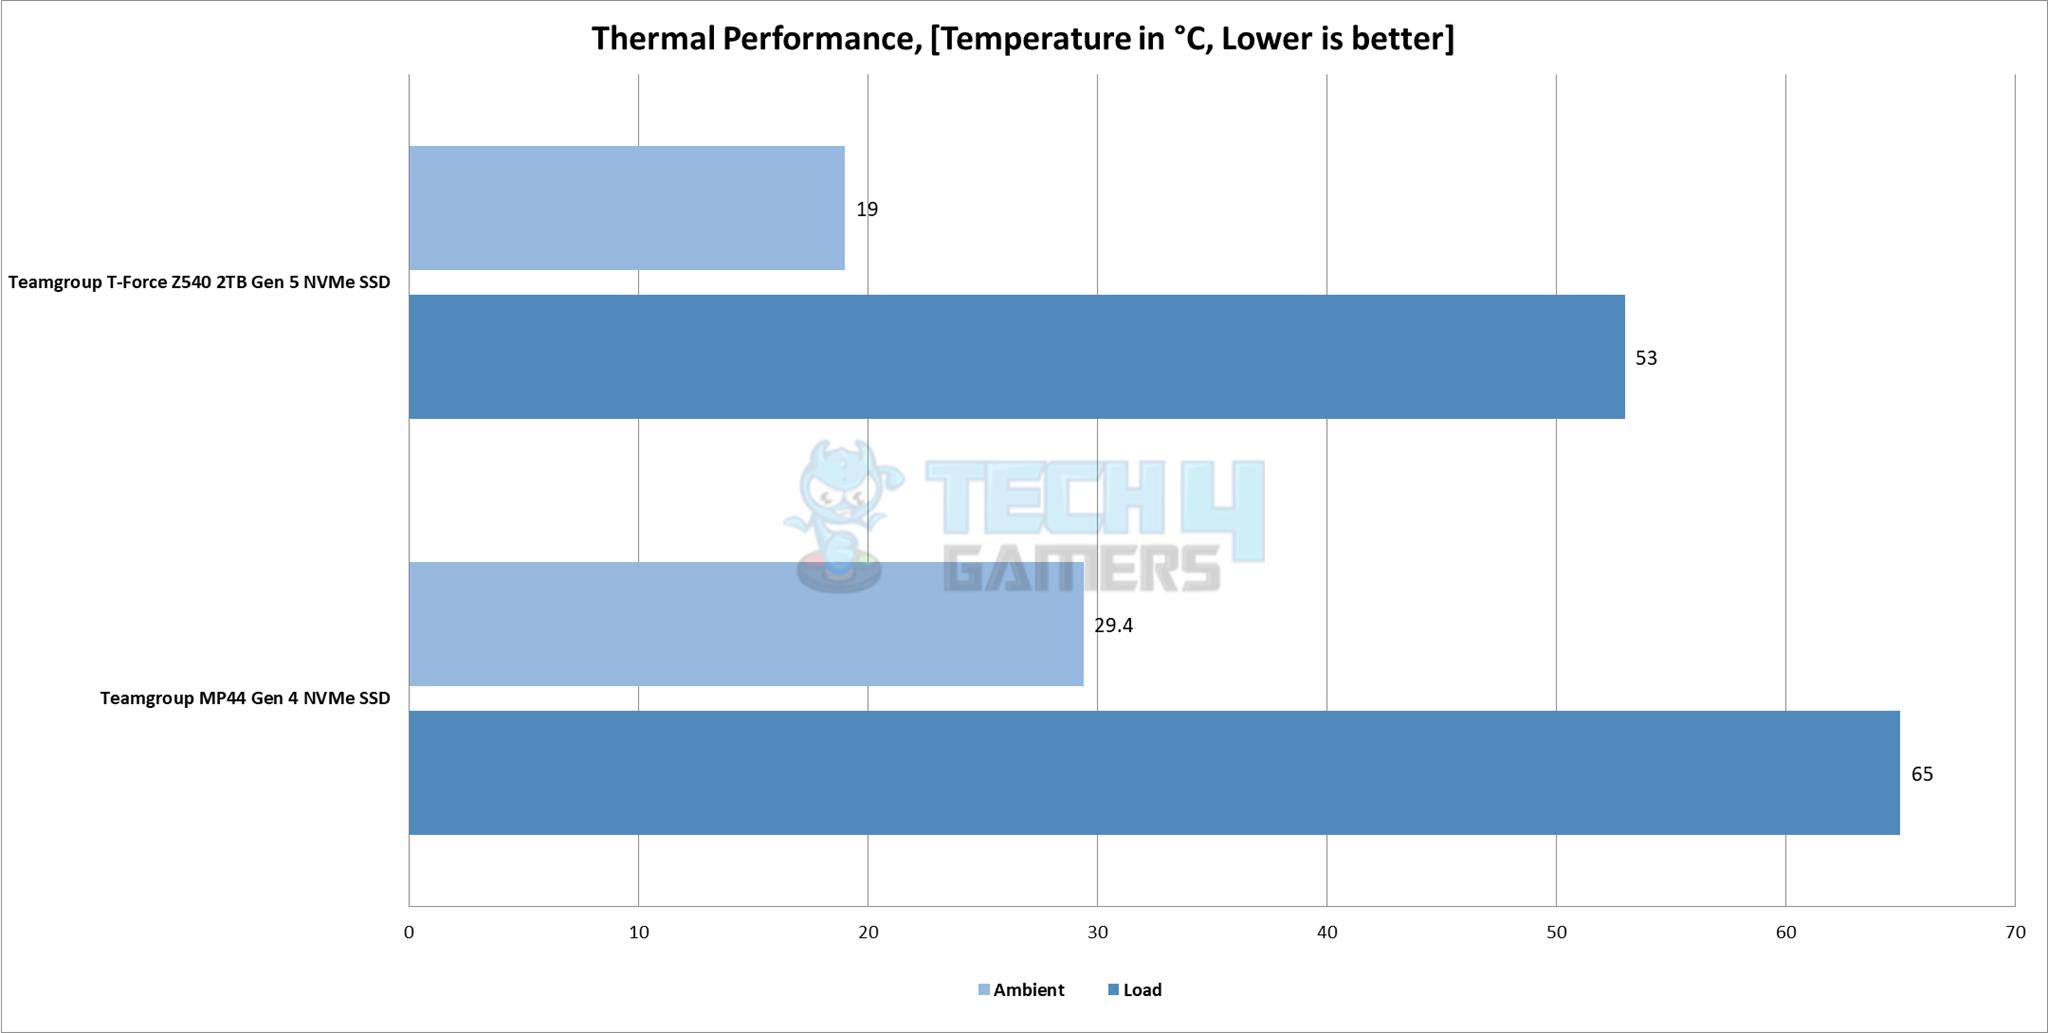 Teamgroup T-Force Z540 2TB Gen5 NVMe SSD — Thermal Performance